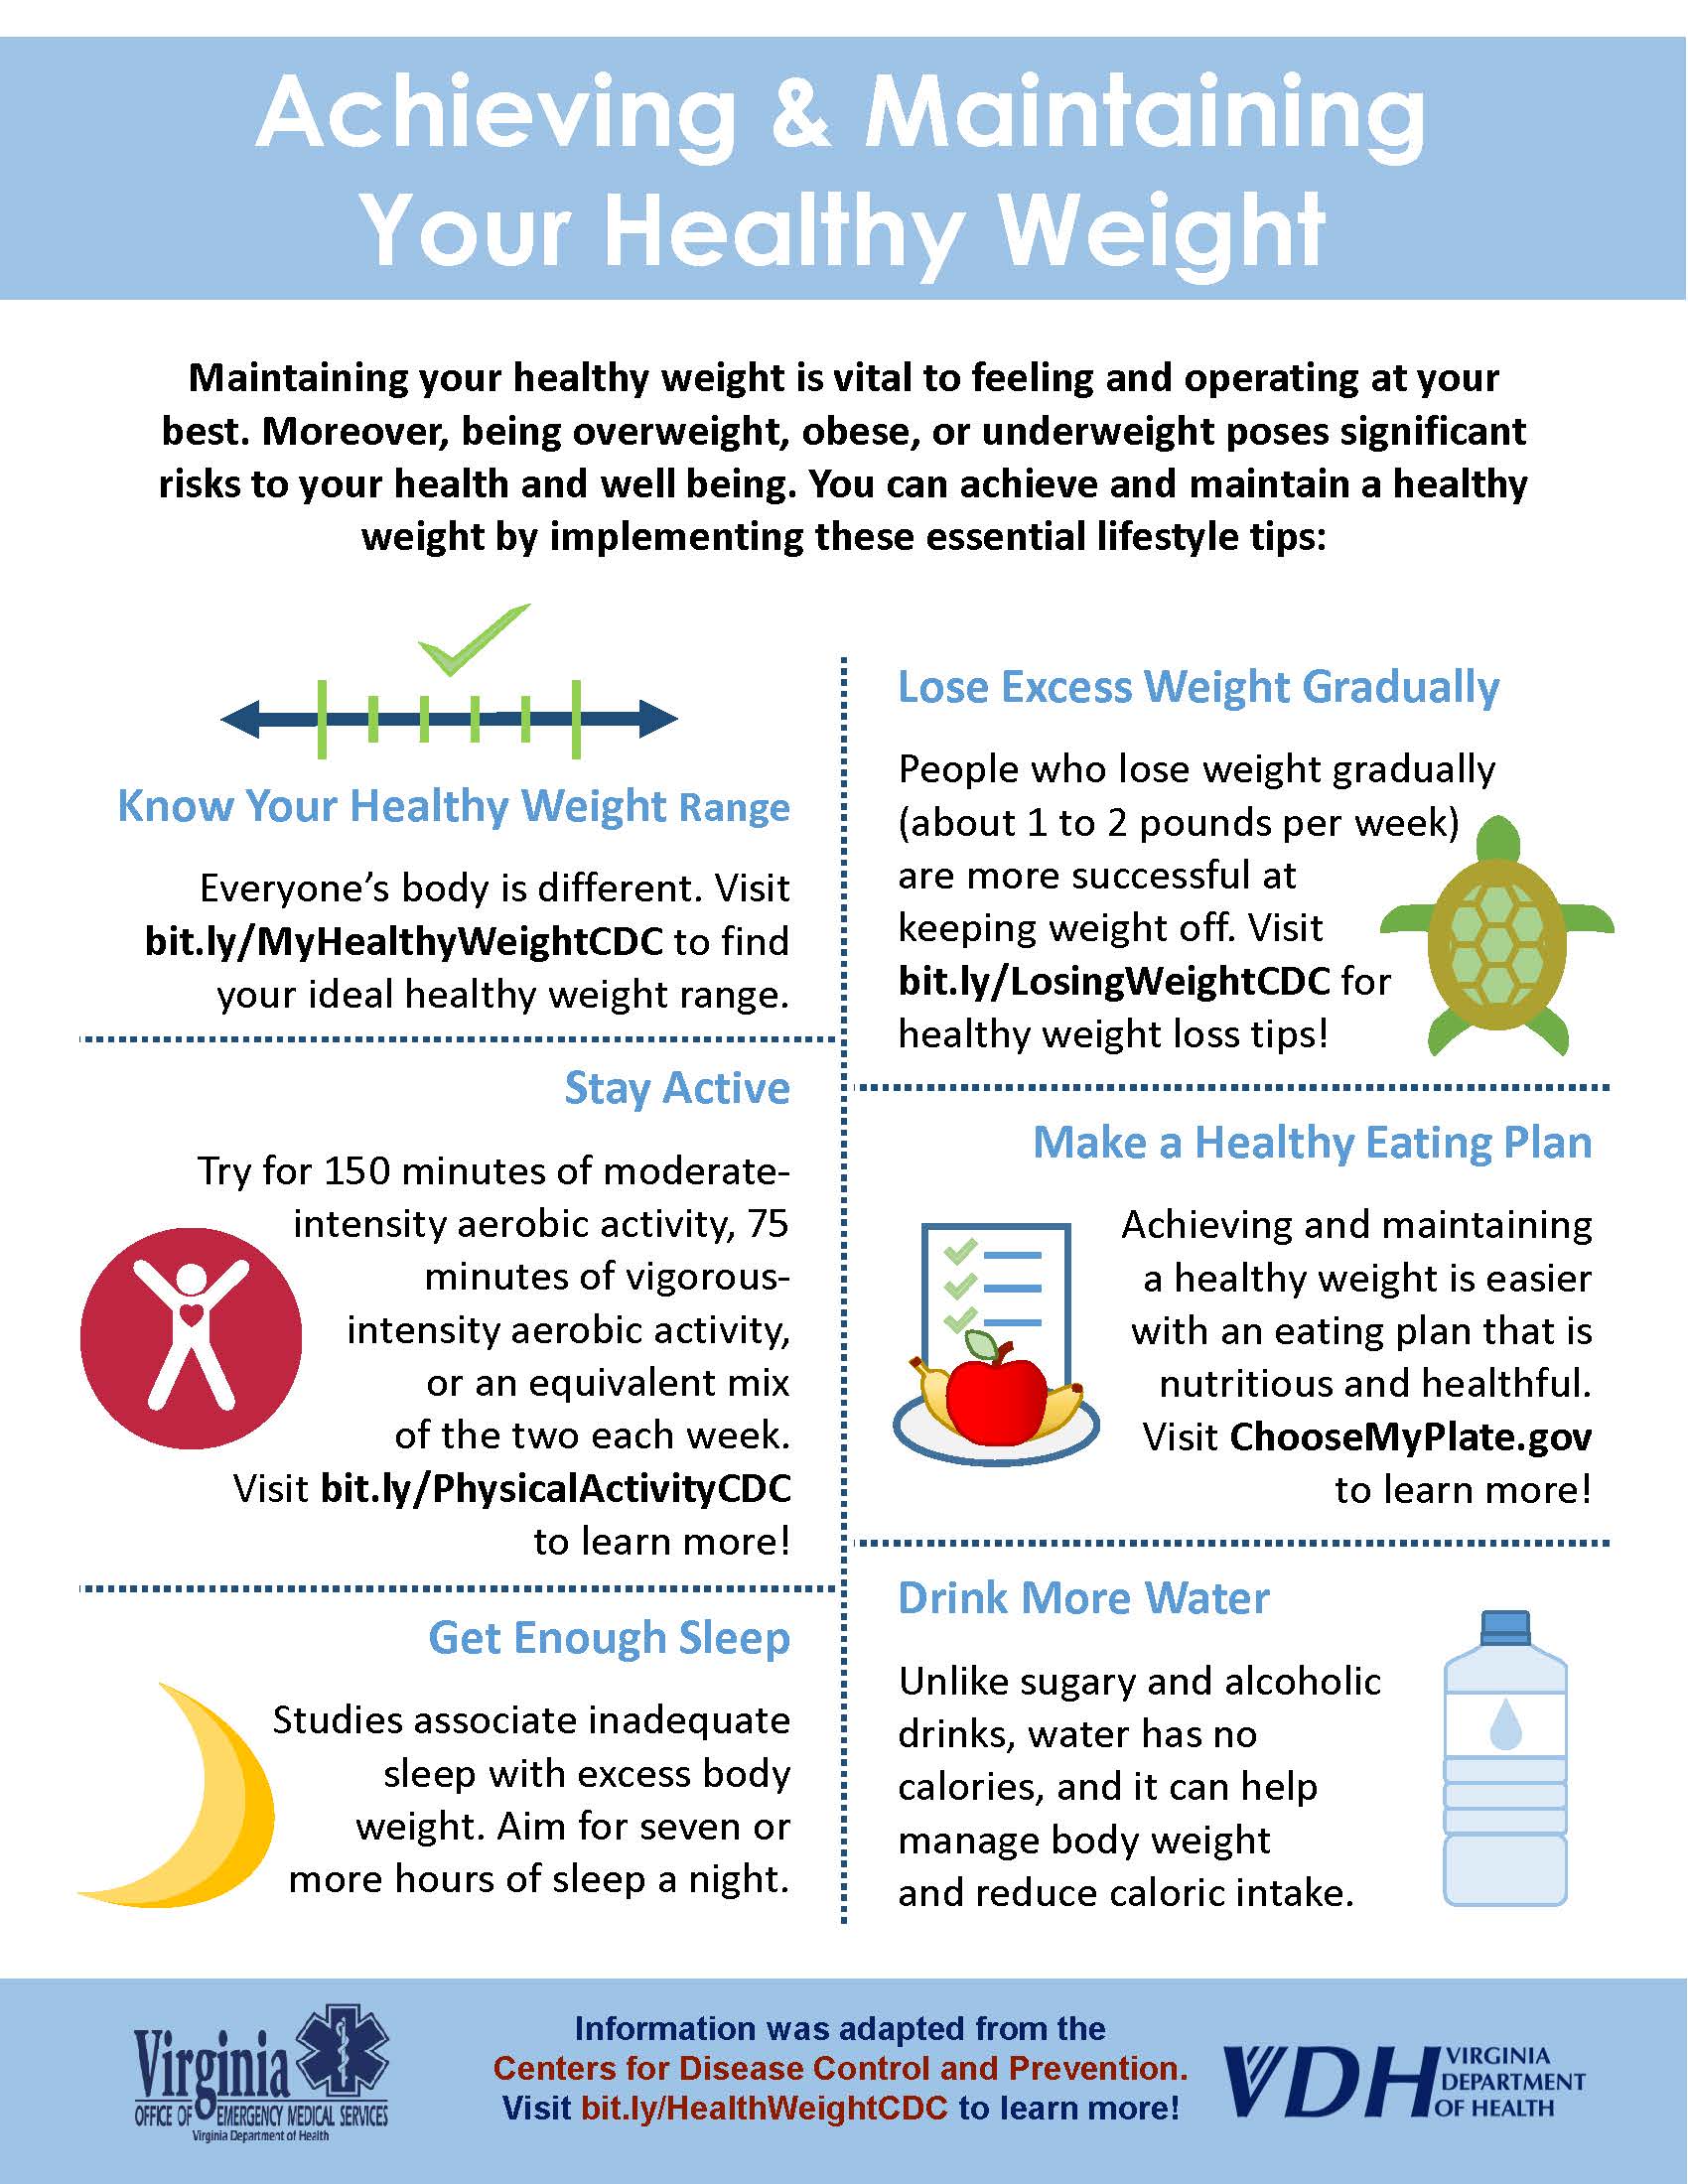 tips to maintain a healthy lifestyle